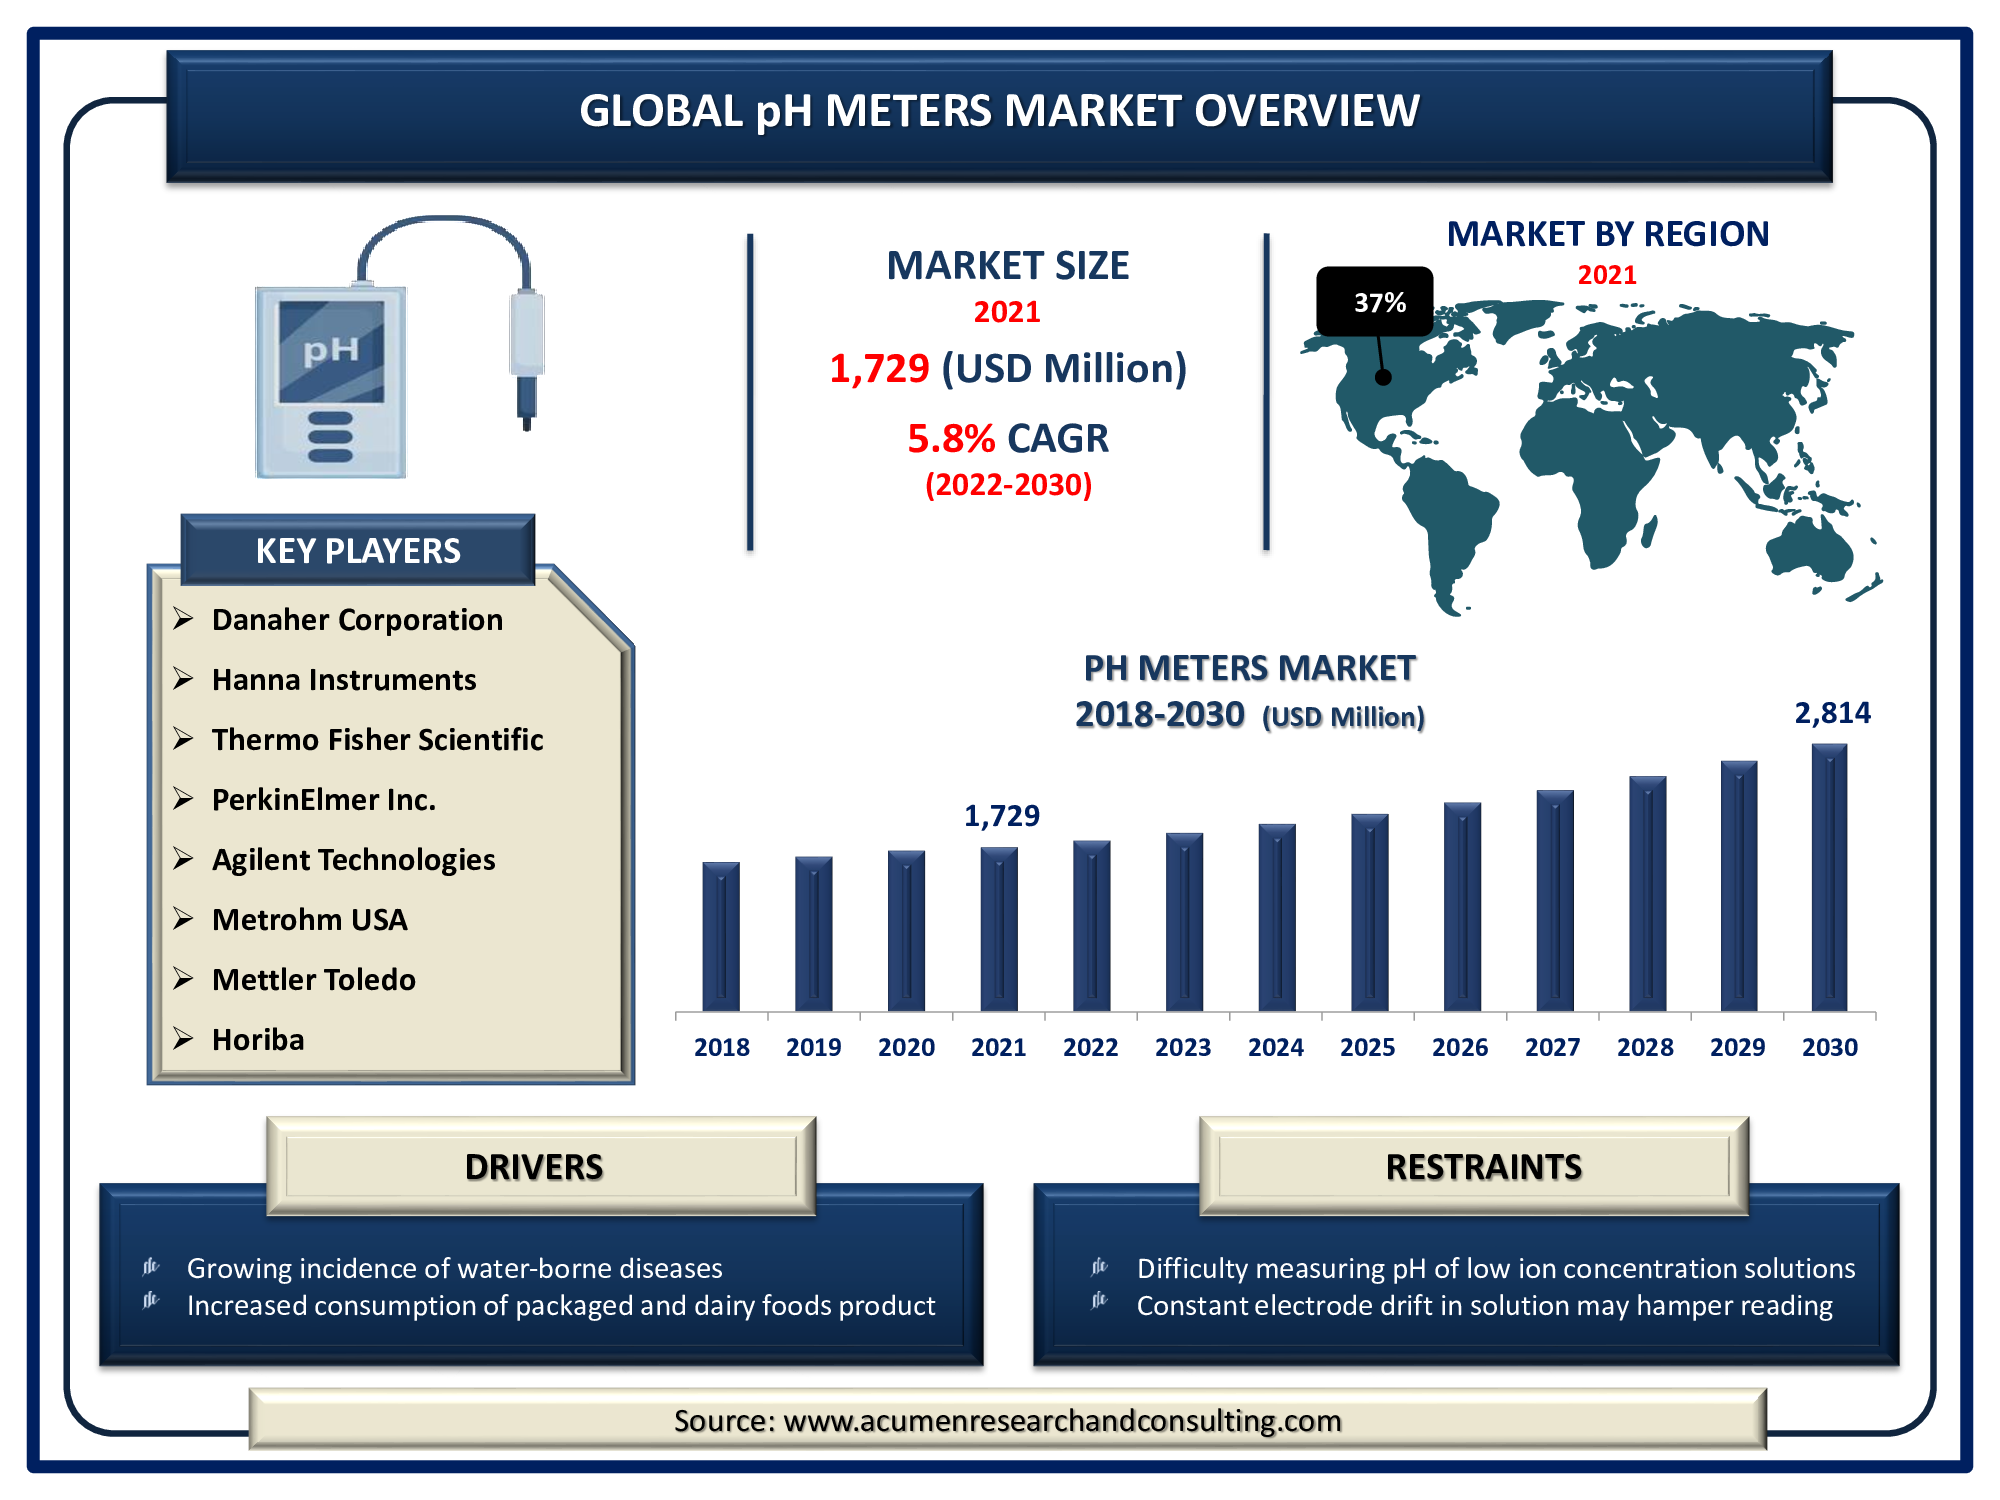 pH Meters Market is expected to reach the market size of USD 2,814 Million by 2030 with a considerable CAGR of 5.8%